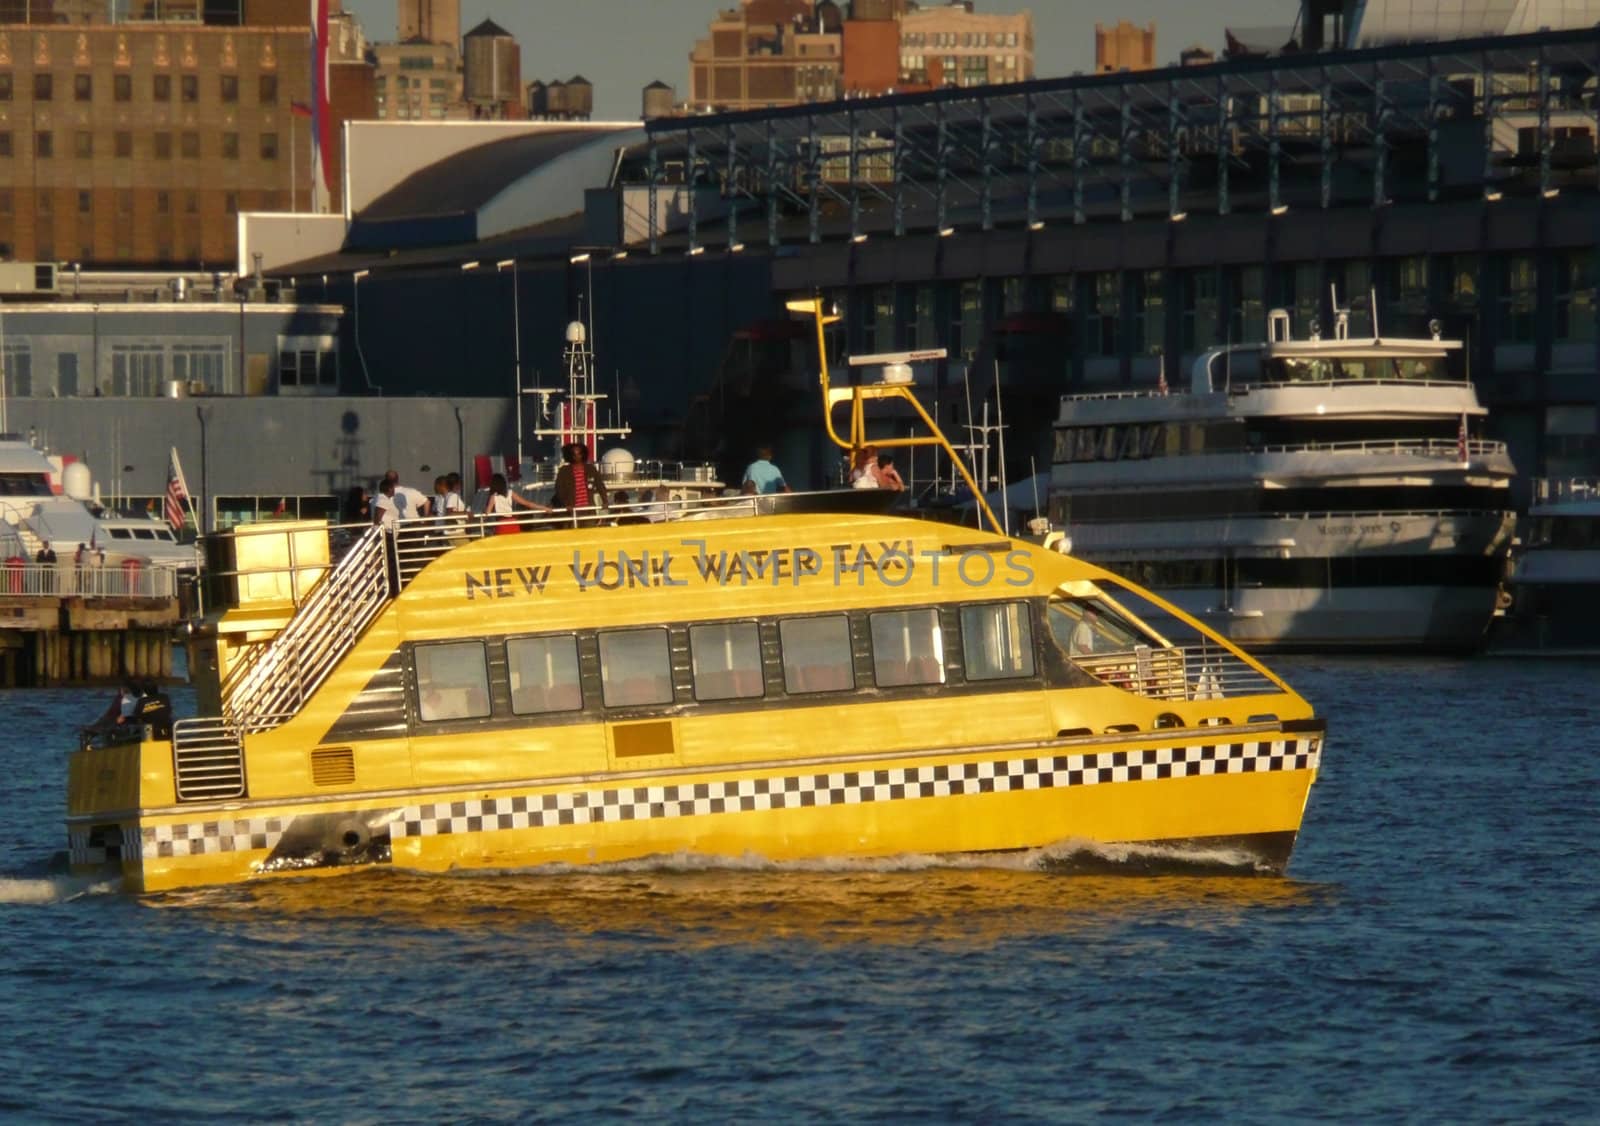 New york water taxi by daboost